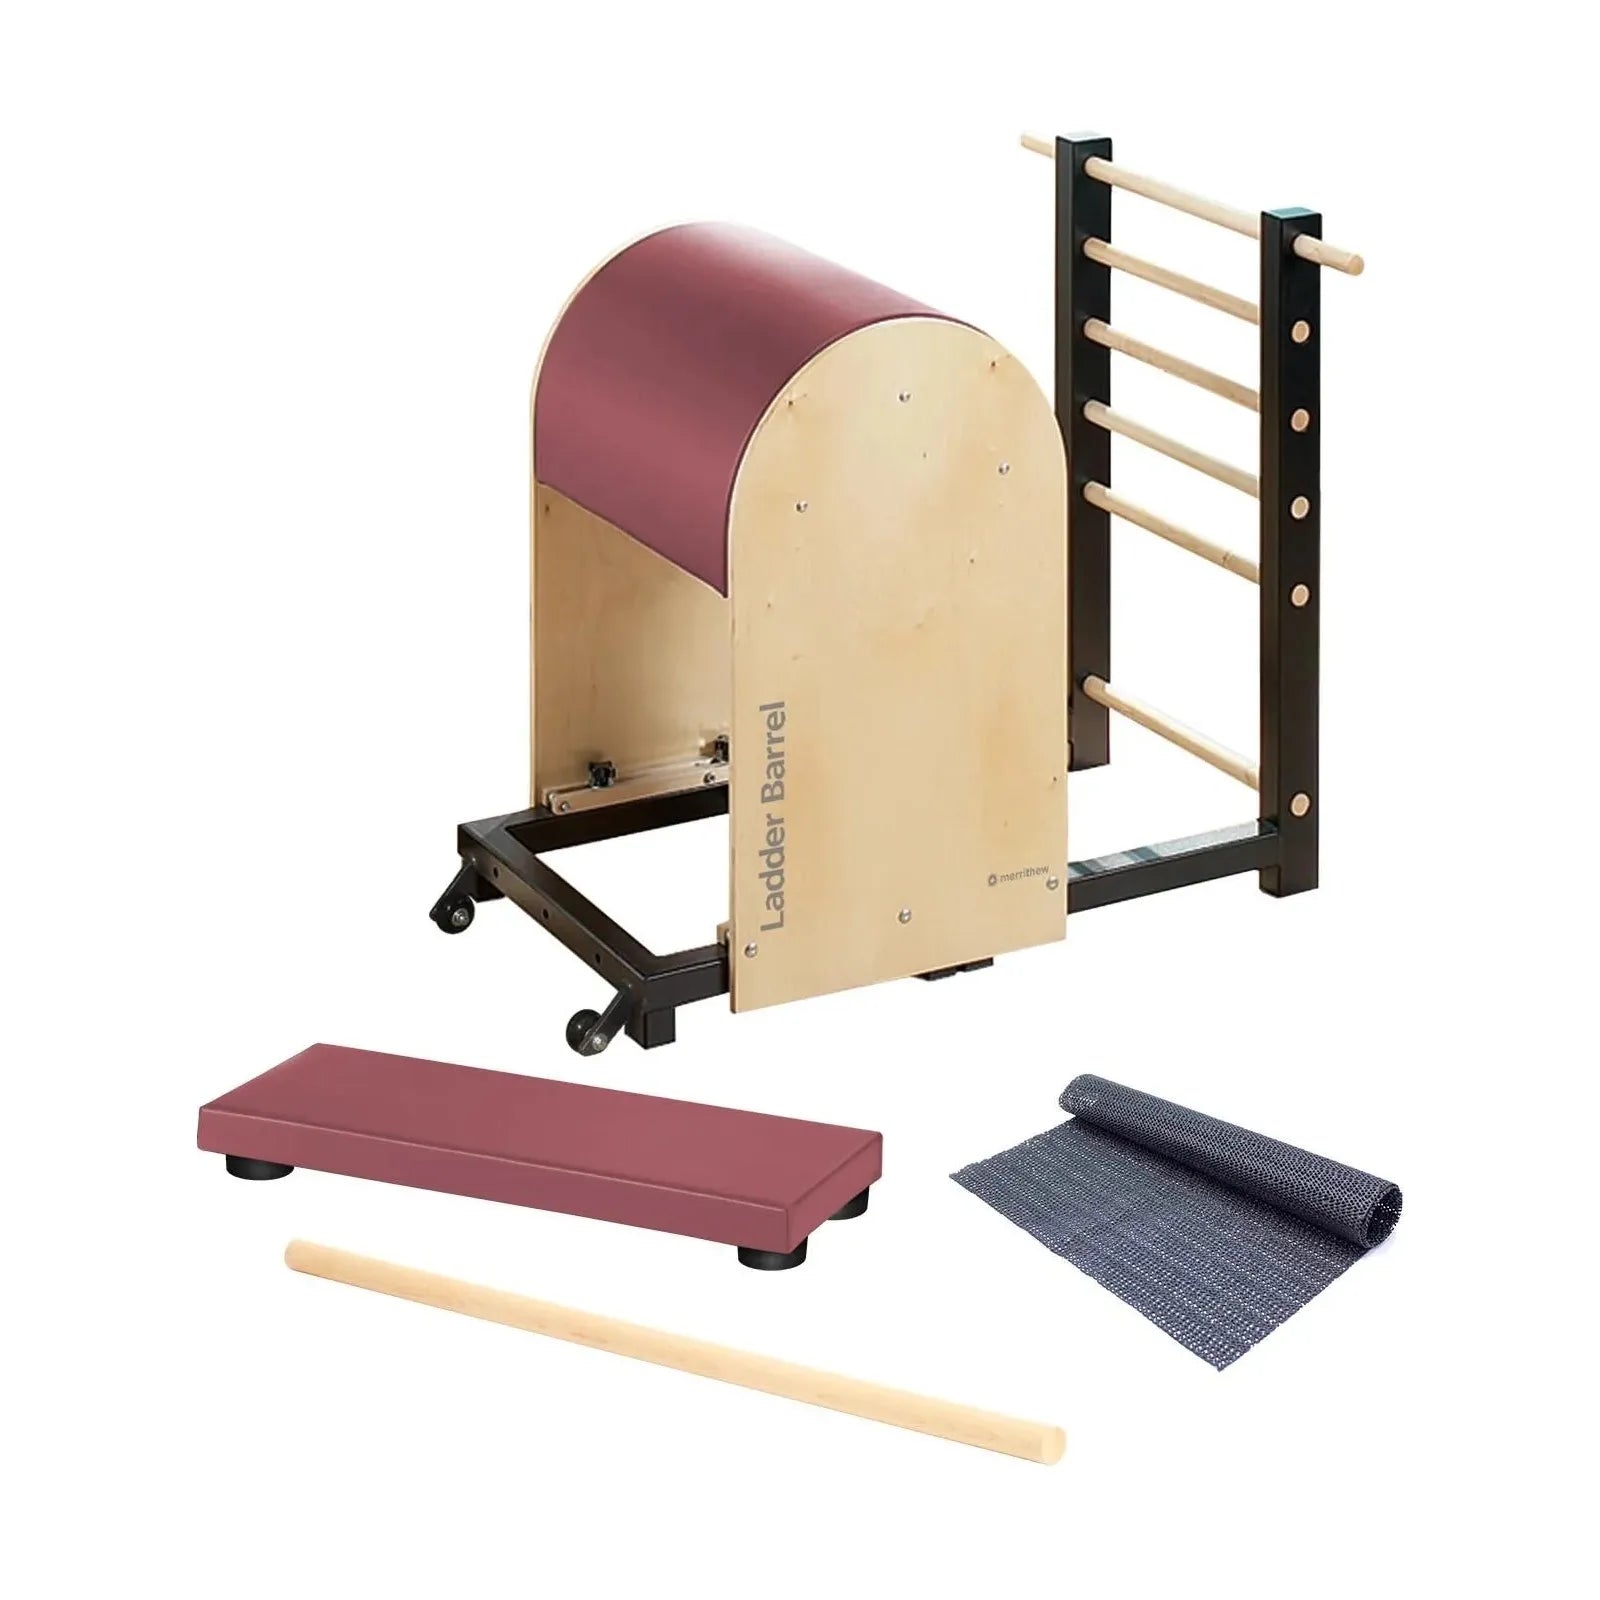 Red Truffle Merrithew™ Pilates Ladder Barrel Bundle by Merrithew™ sold by Pilates Matters® by BSP LLC